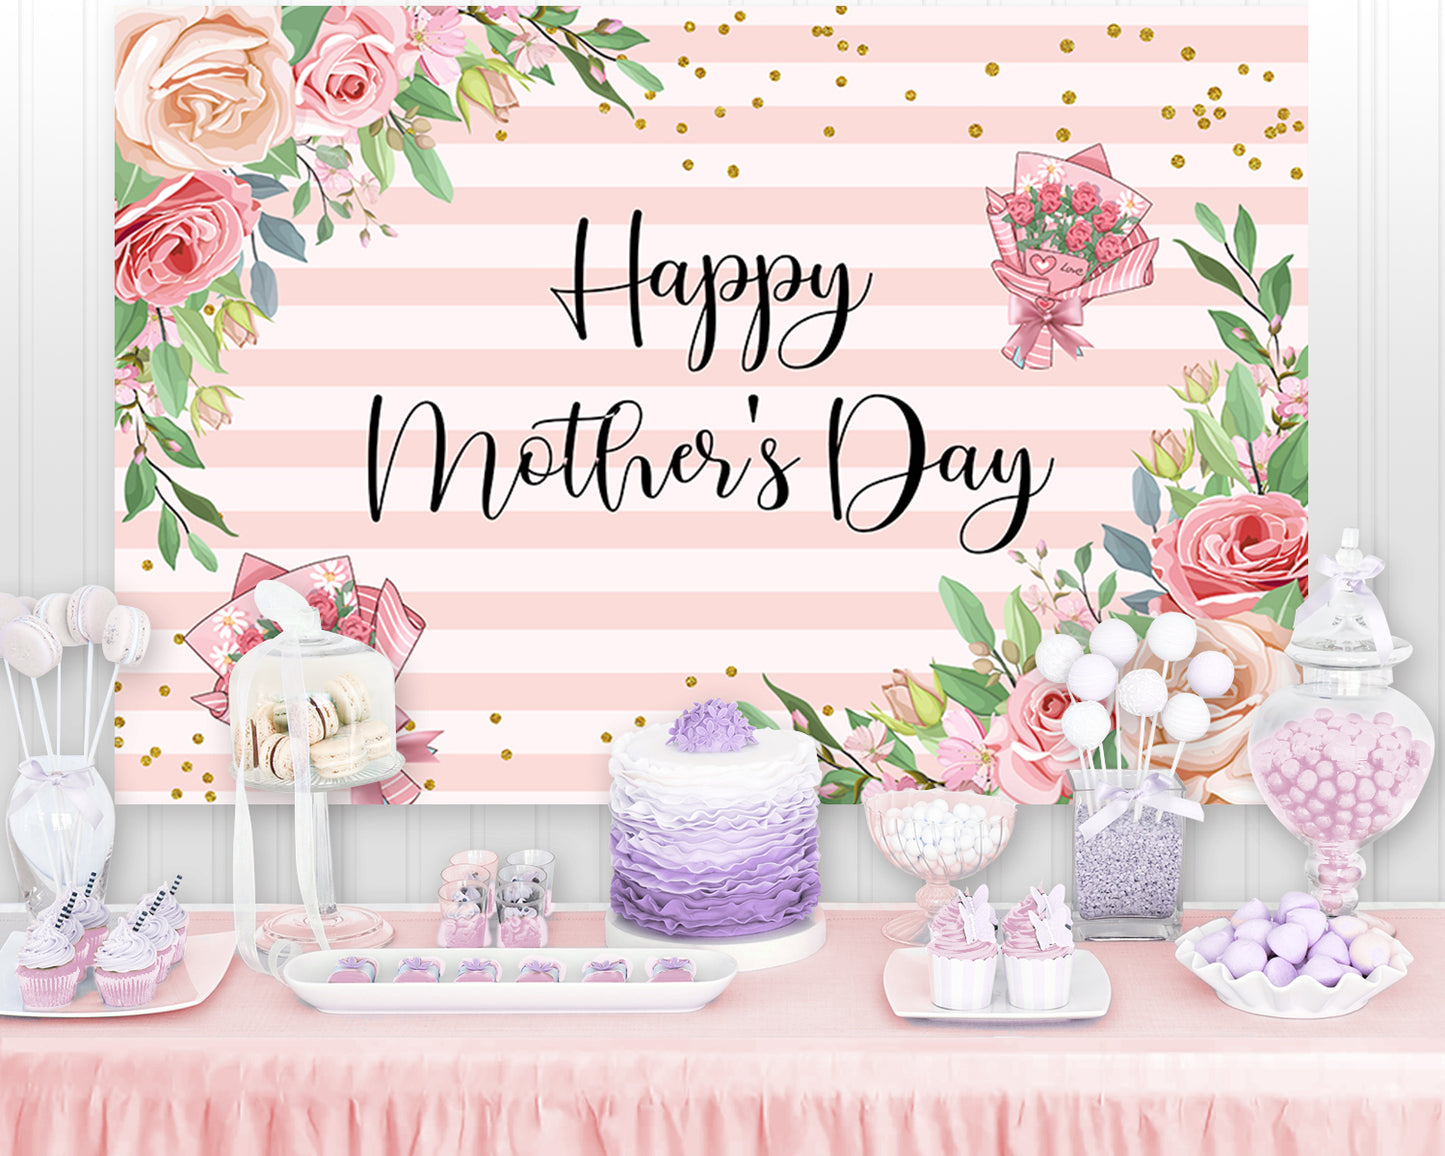 Mothers' Day Photography Backdrops Pink White Stripes Flowers Decoration Banner Mother Party Portrait Photo Background Photobooth